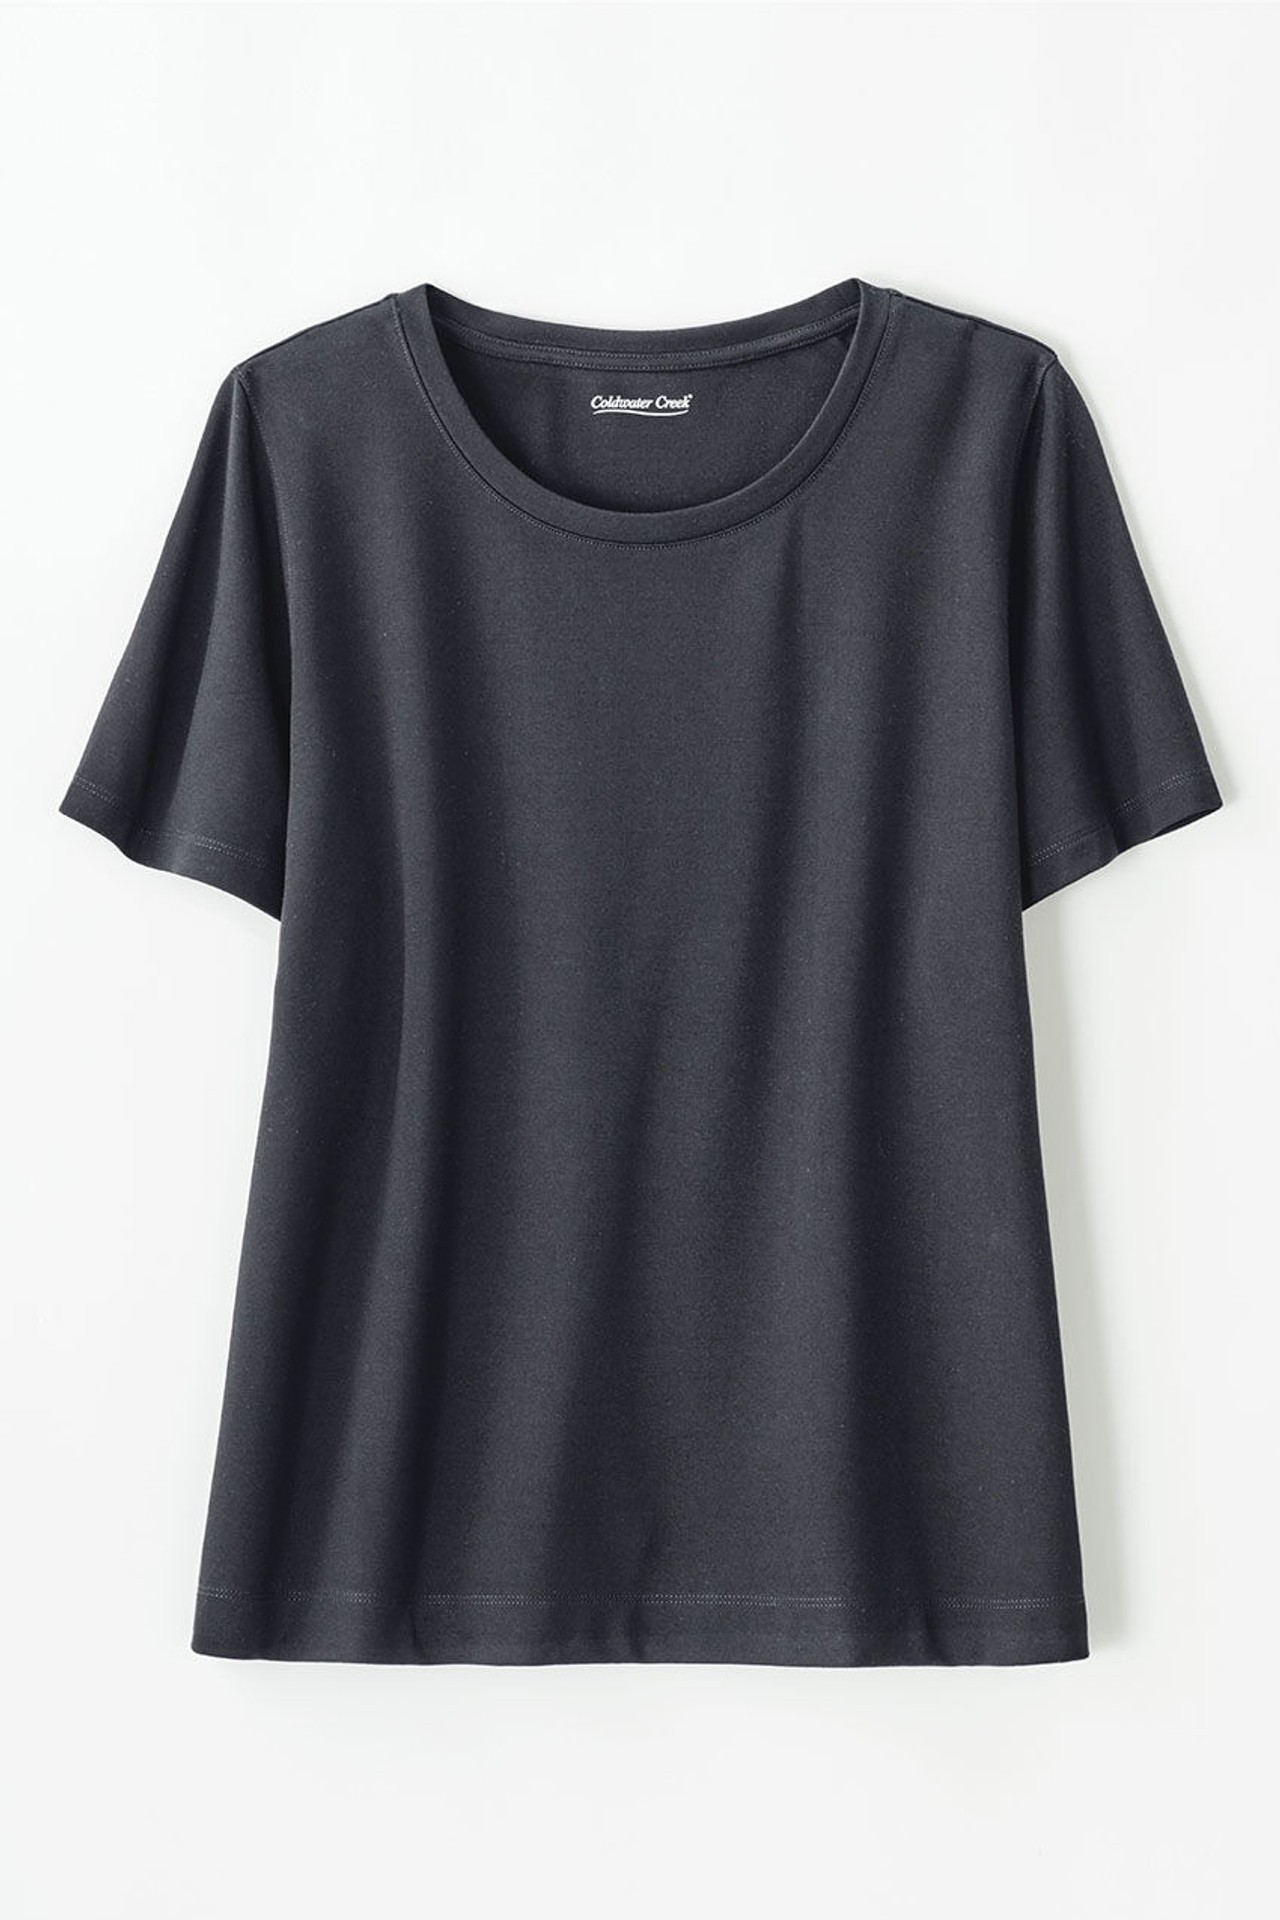 Destinations by Coldwater Creek® Boxy Crew Top